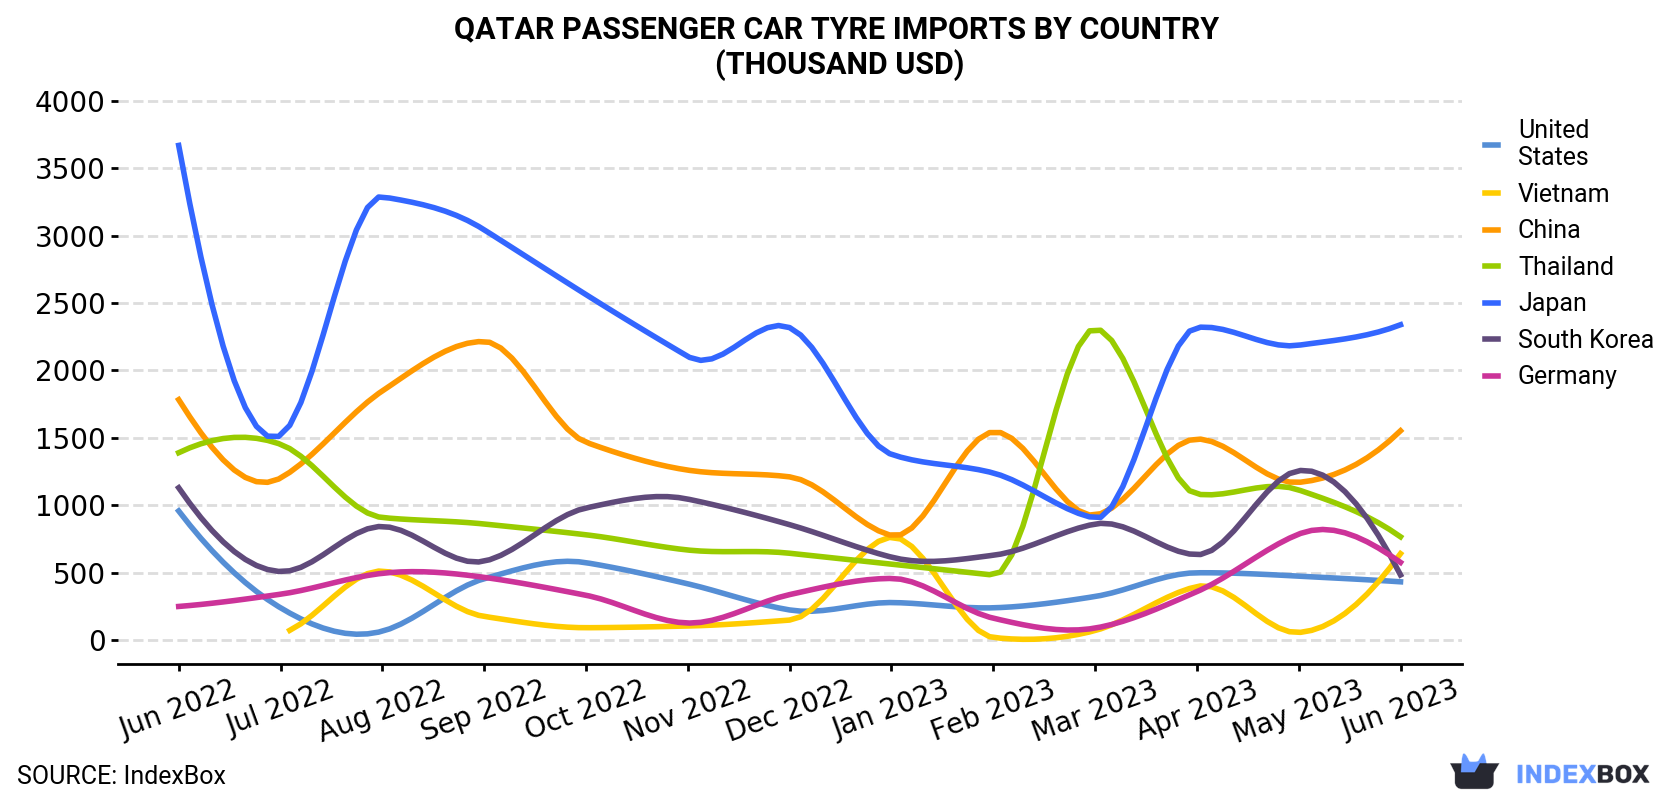 Qatar Passenger Car Tyre Imports By Country (Thousand USD)